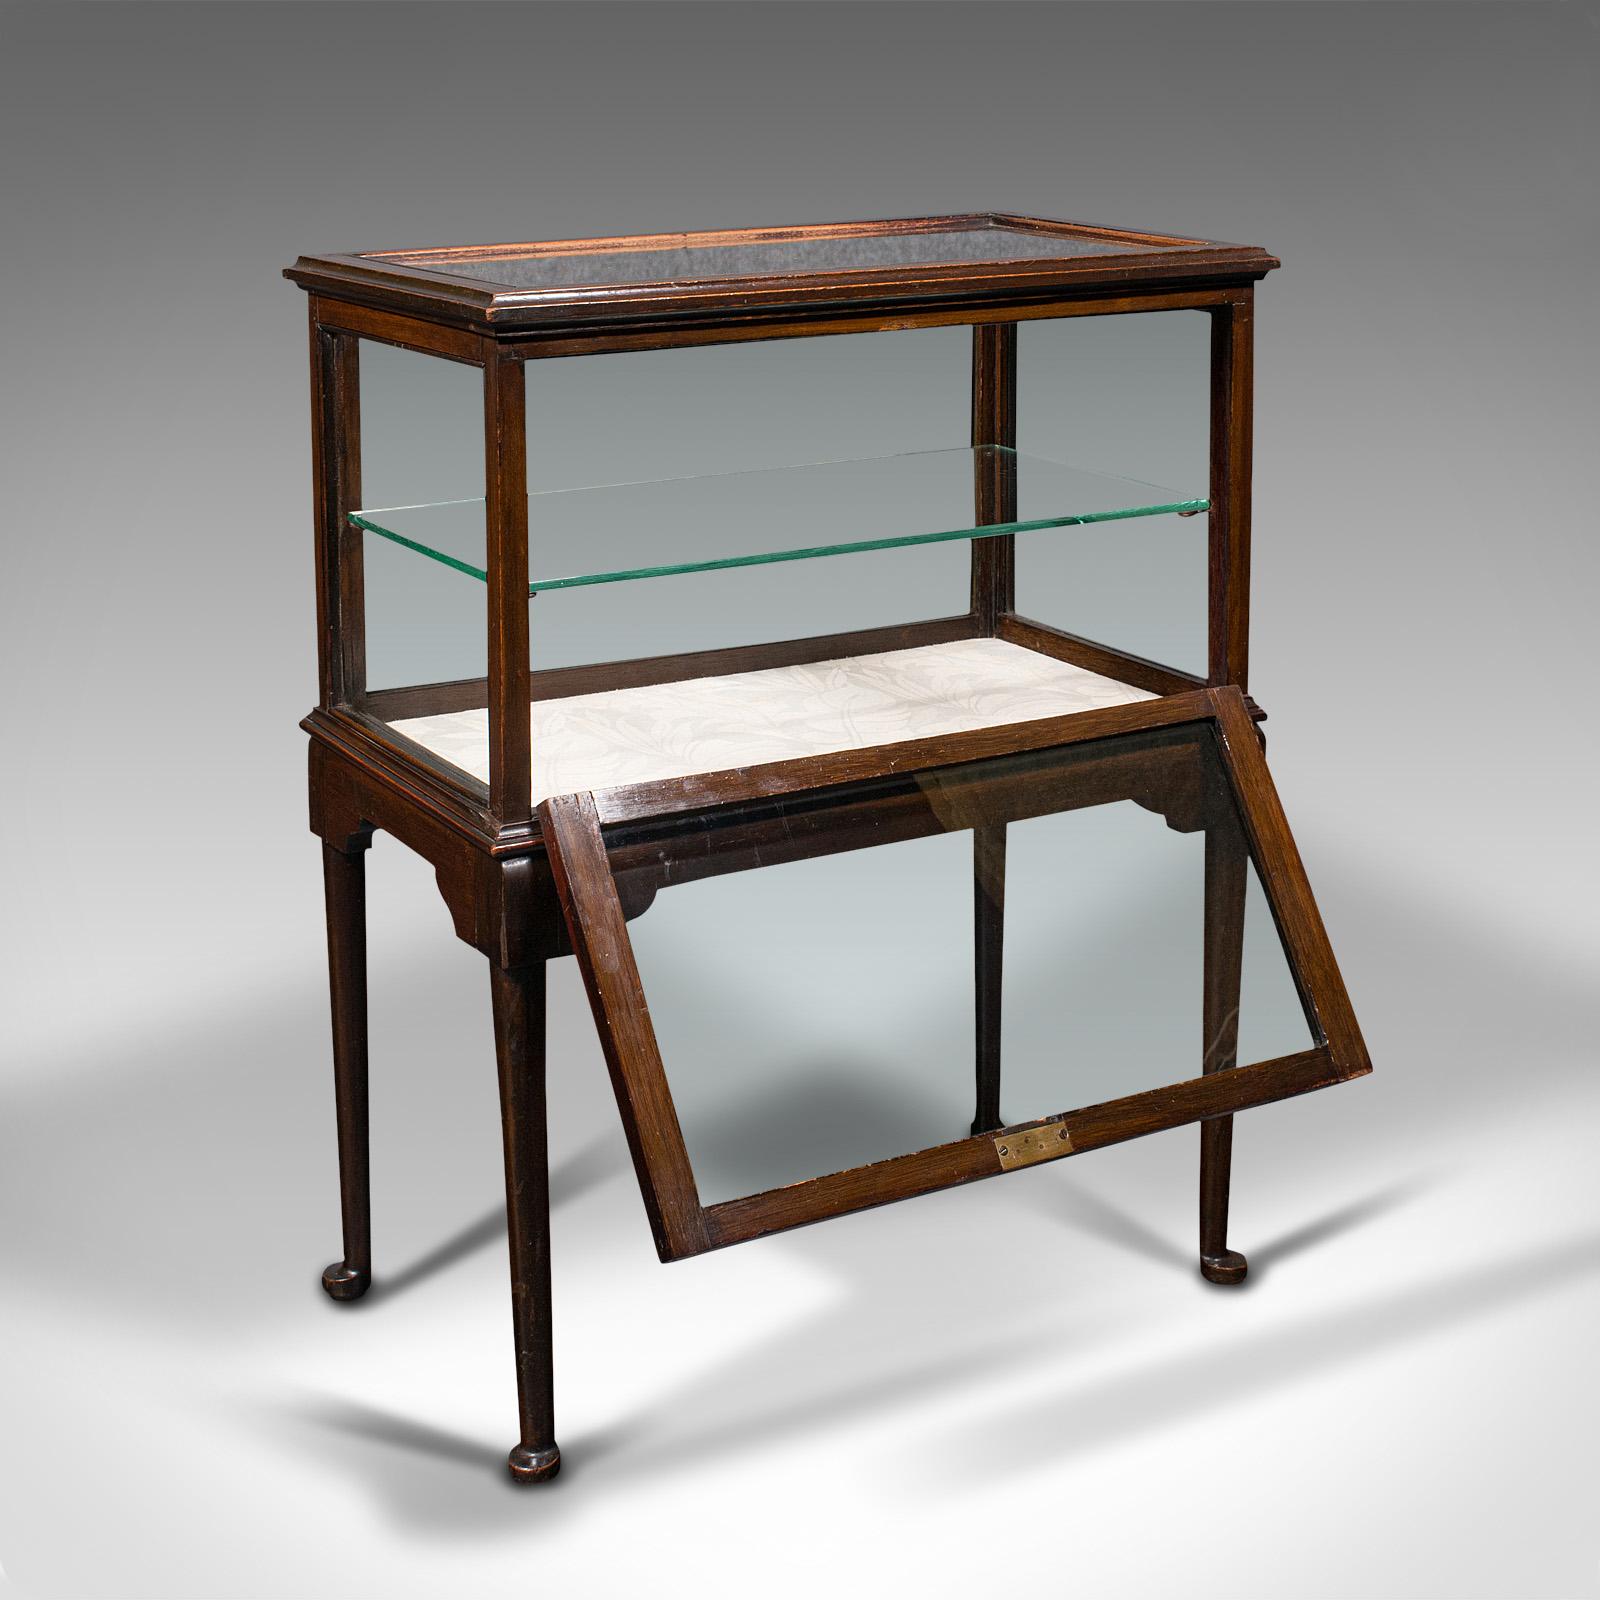 This is an antique display case. An English, mahogany bijouterie table, dating to the Edwardian period, circa 1910.

Pleasingly bright display cabinet, ideal for central room placement
Displaying a desirable aged patina and in good order
Select